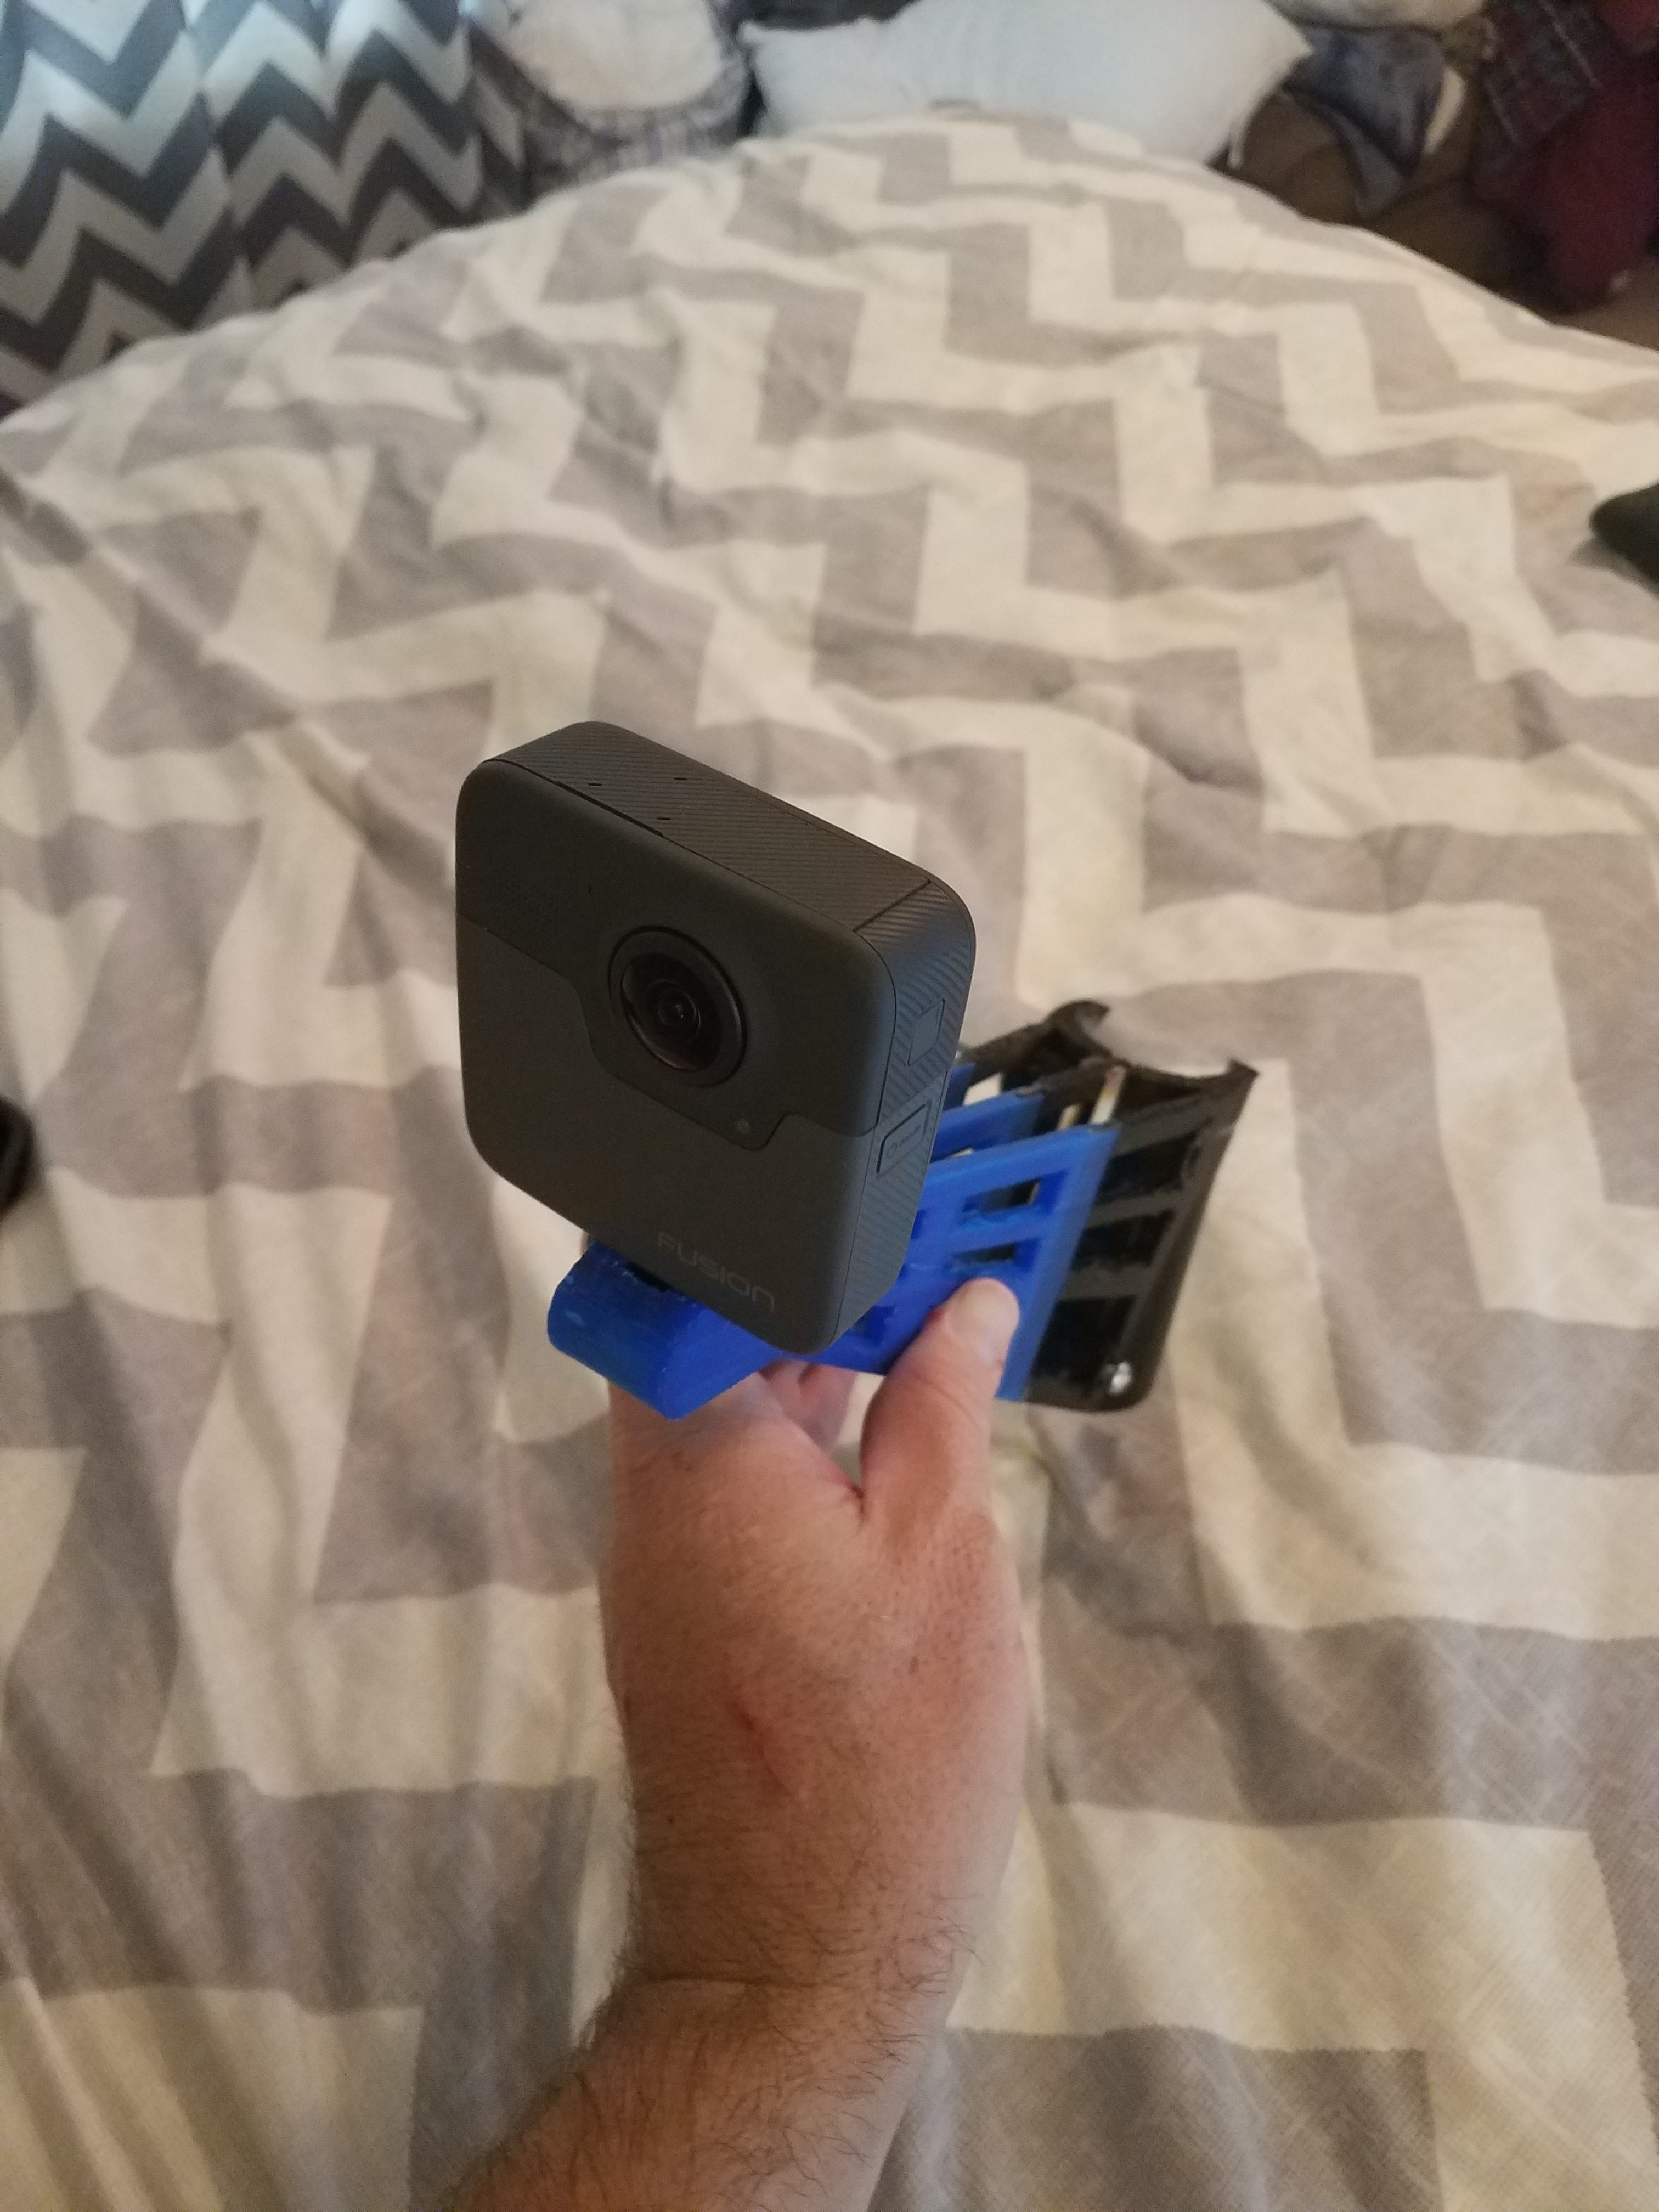 3d Printed Gopro Mountain Bike Mount Great For Fusion Or Max Footie By Hank Zenxteninc Pinshape